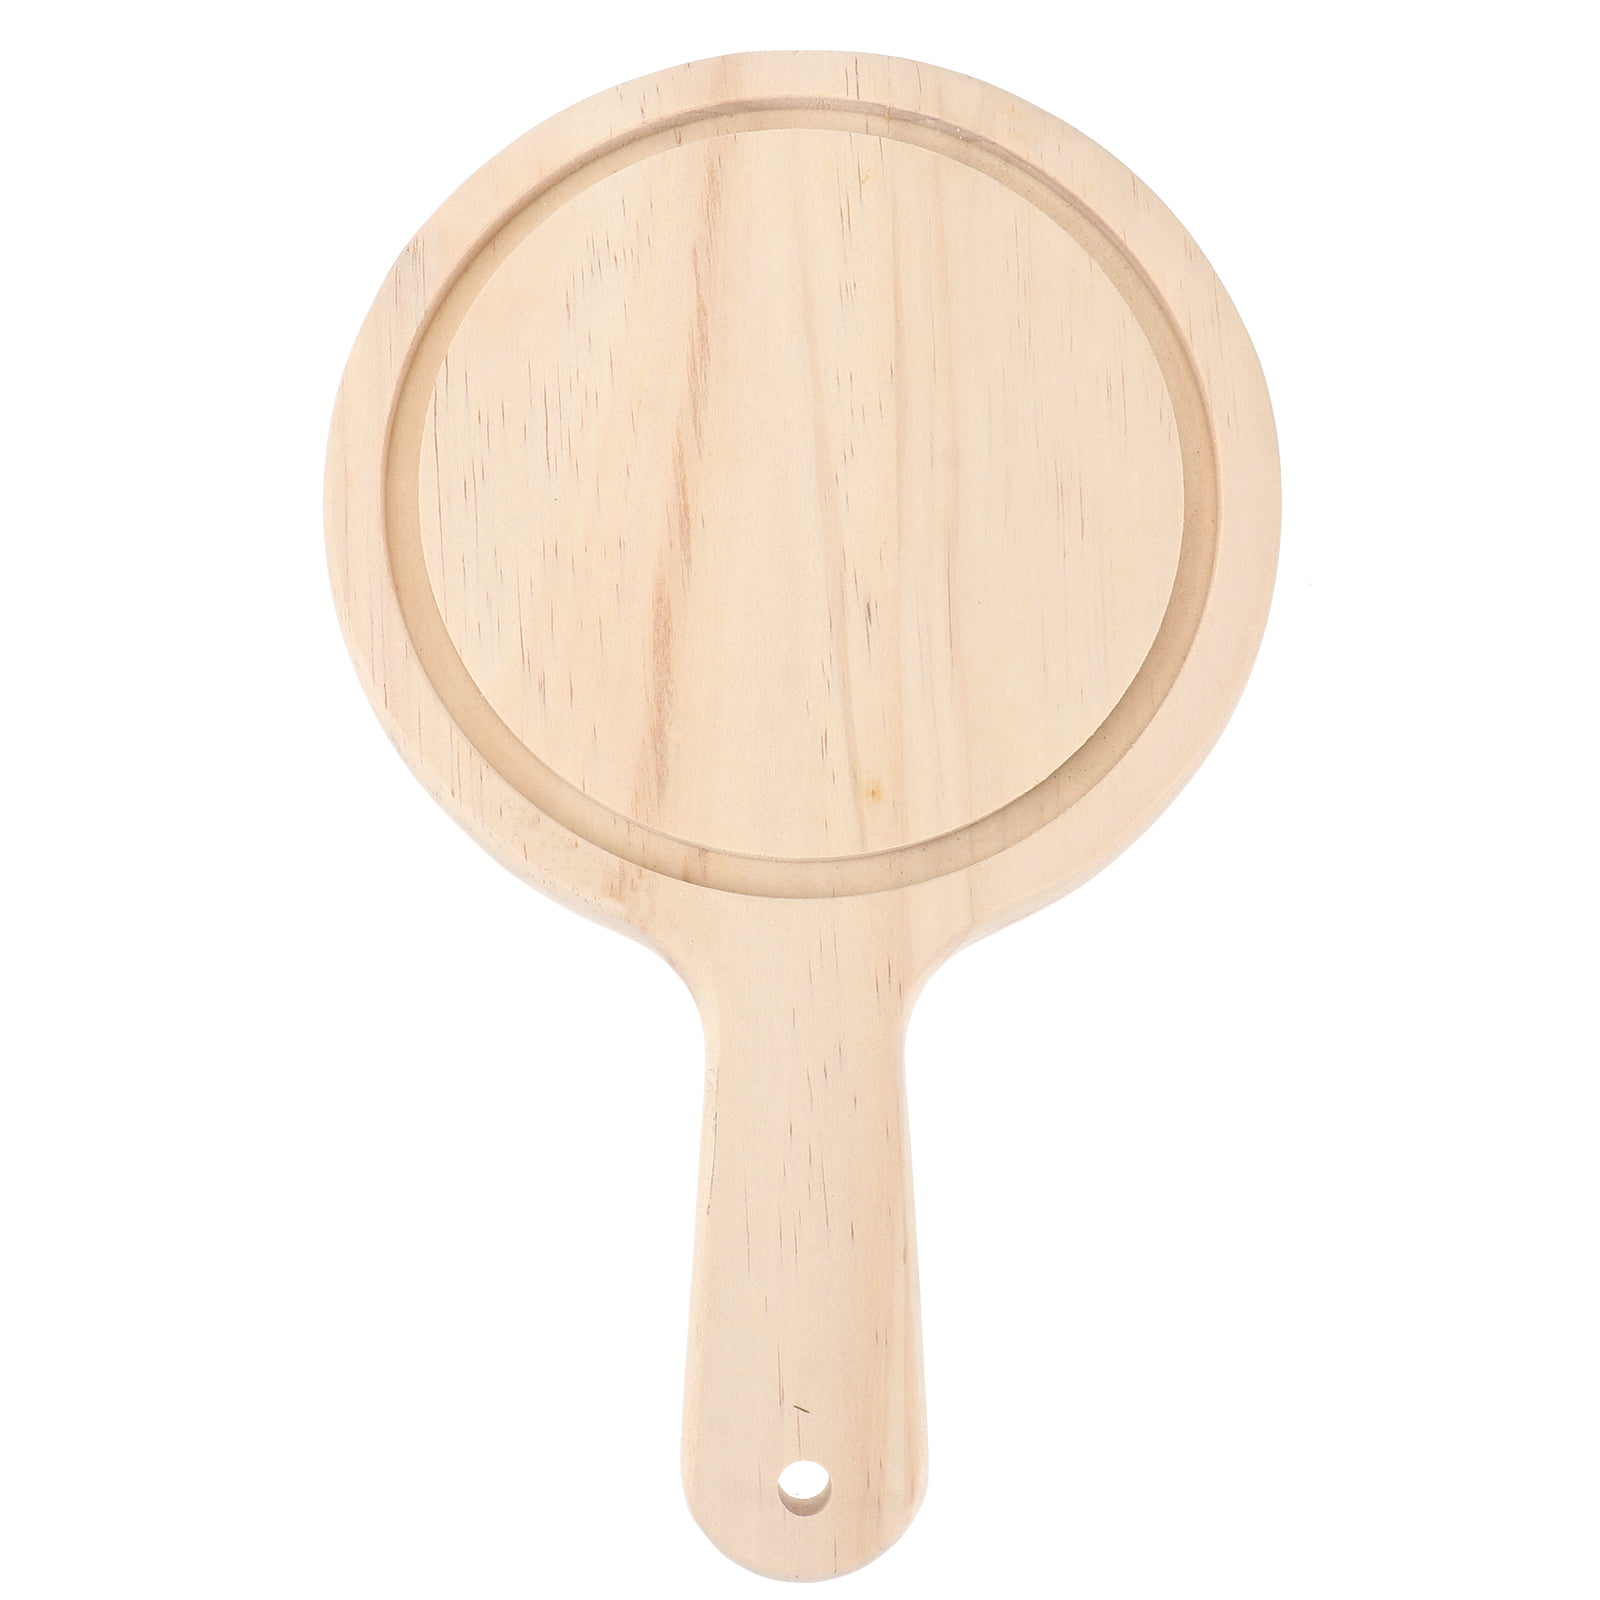 BESTONZON 12 Inch Wooden Pizza Paddle Pizza Peel with Rounded Edges Professional Kitchen Accessories Homemade Cooking Pizza and Bread 